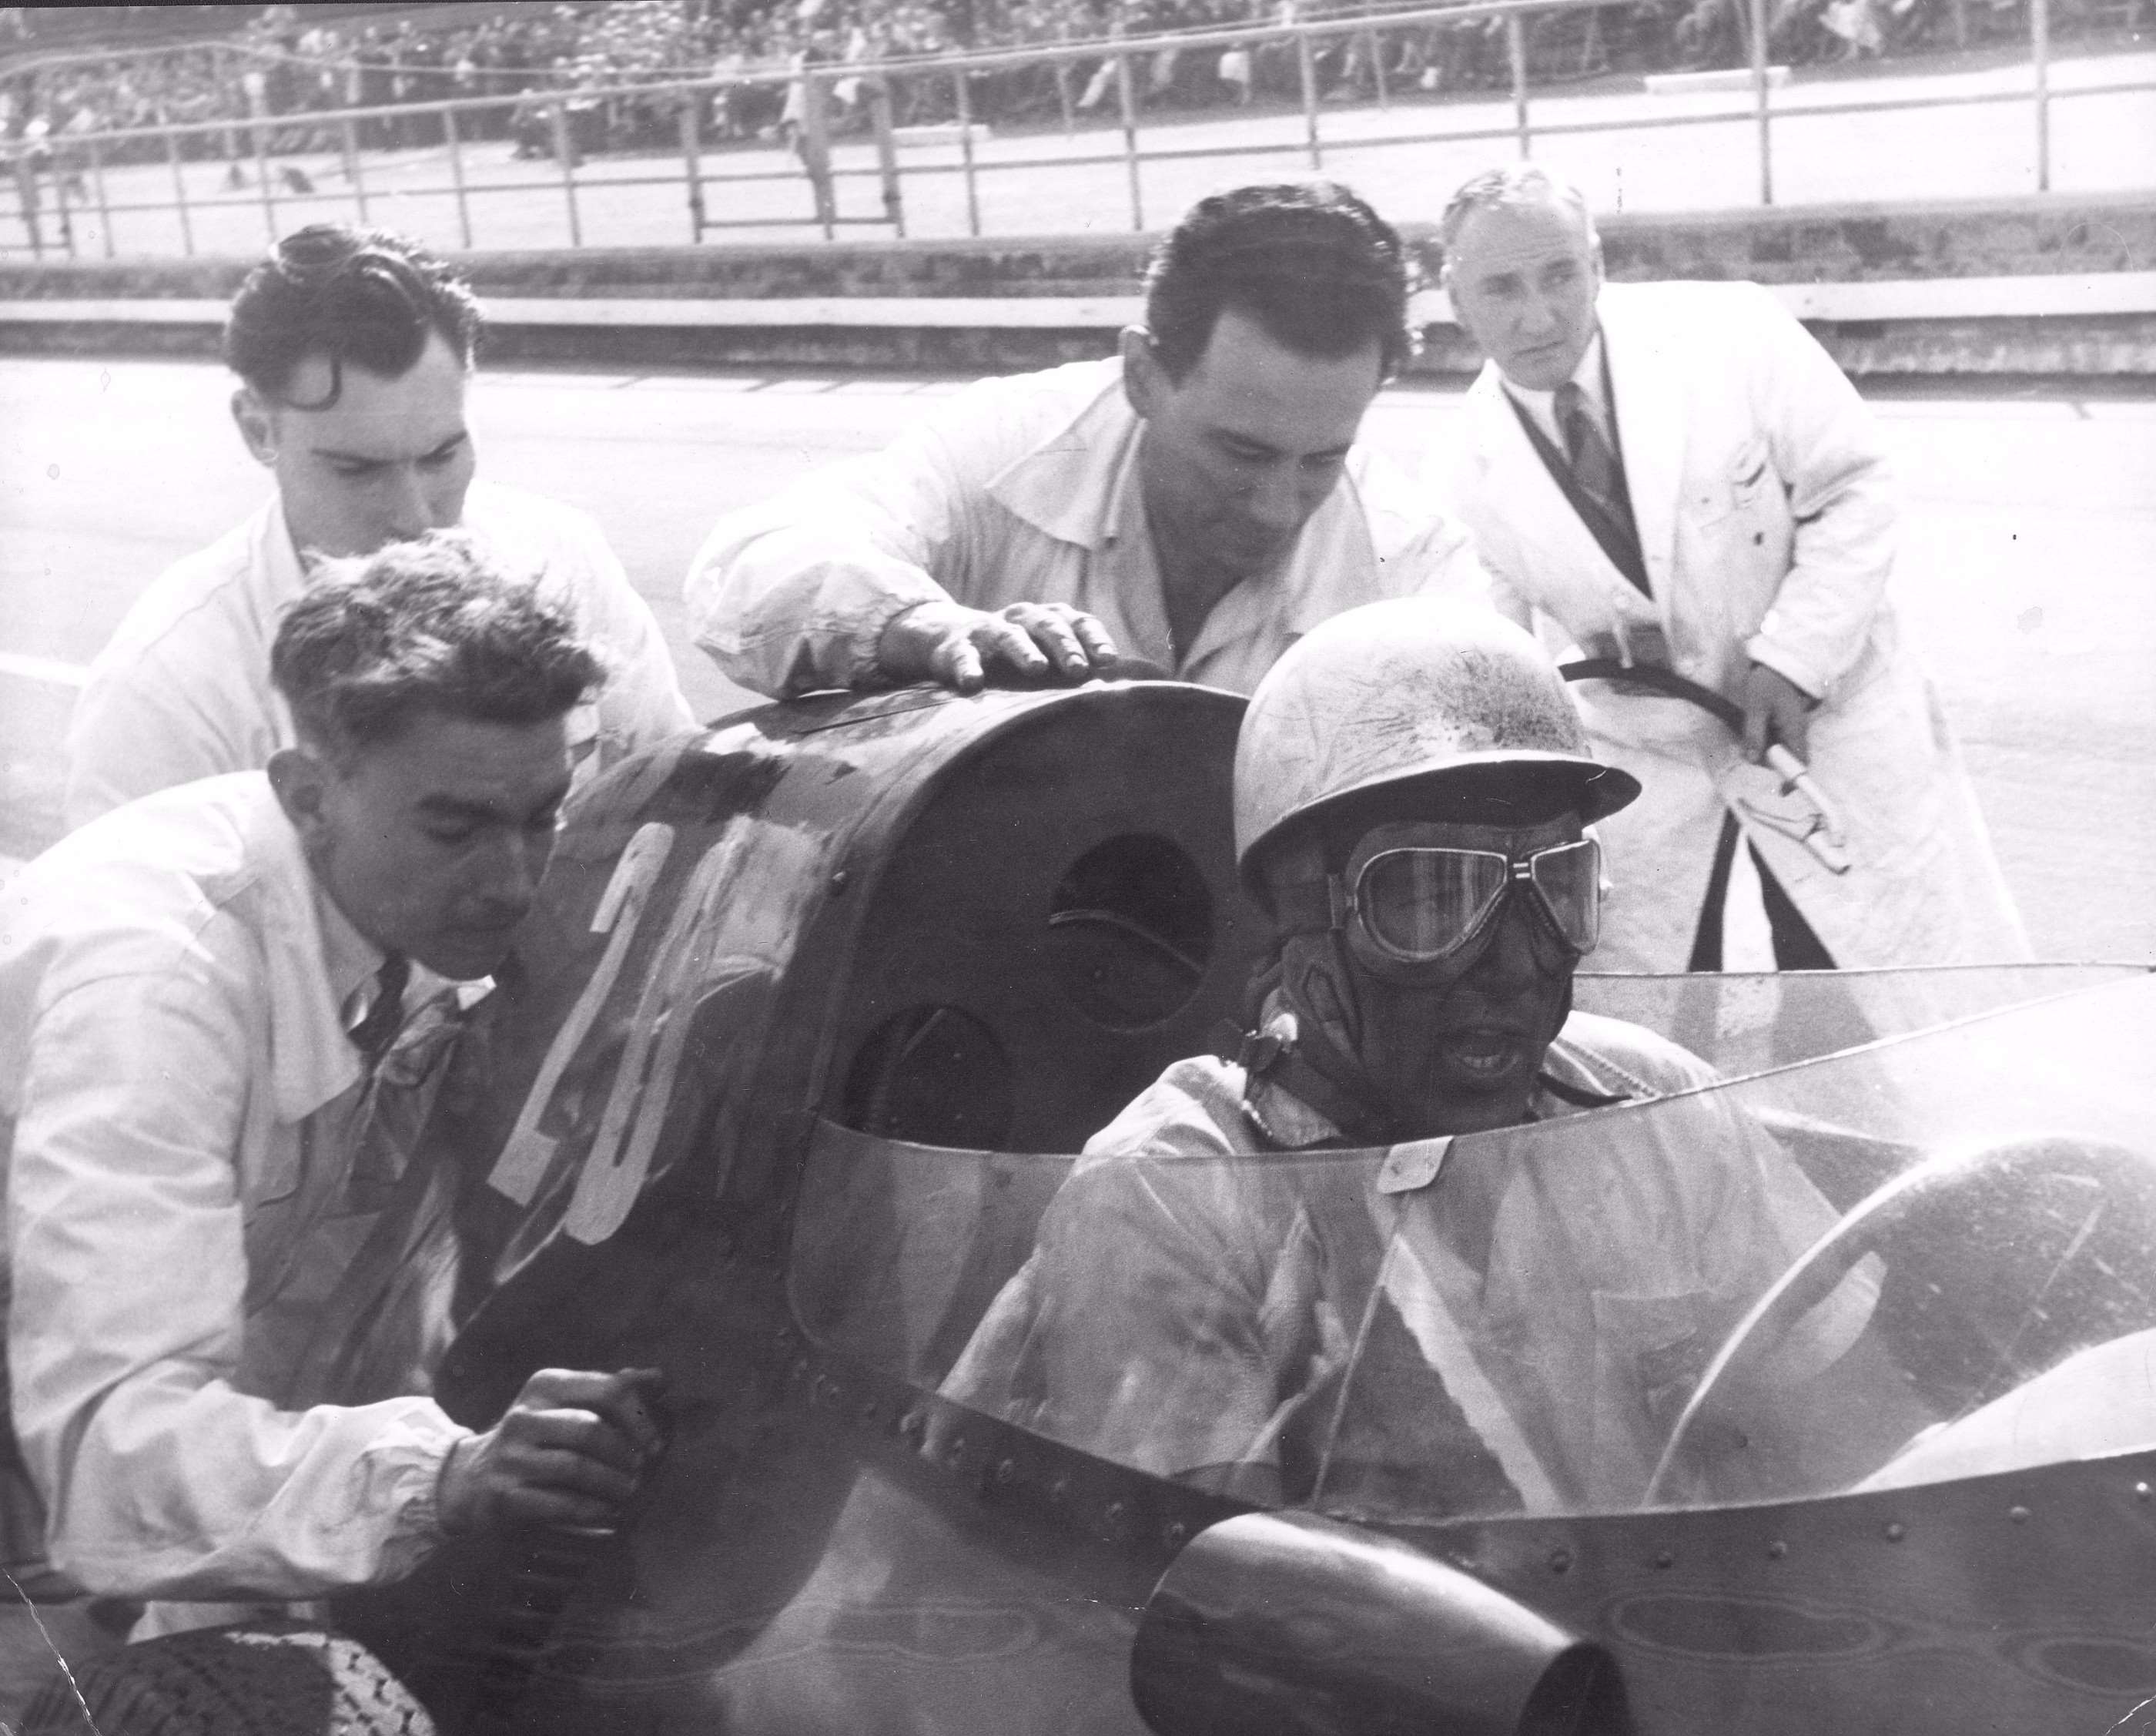 True Tiger! Moss urging on his mechanics to push-start the No 20 Vanwall he had just taken over from Tony Brooks - en route to winning the breakthrough 1957 British GP at Aintree!